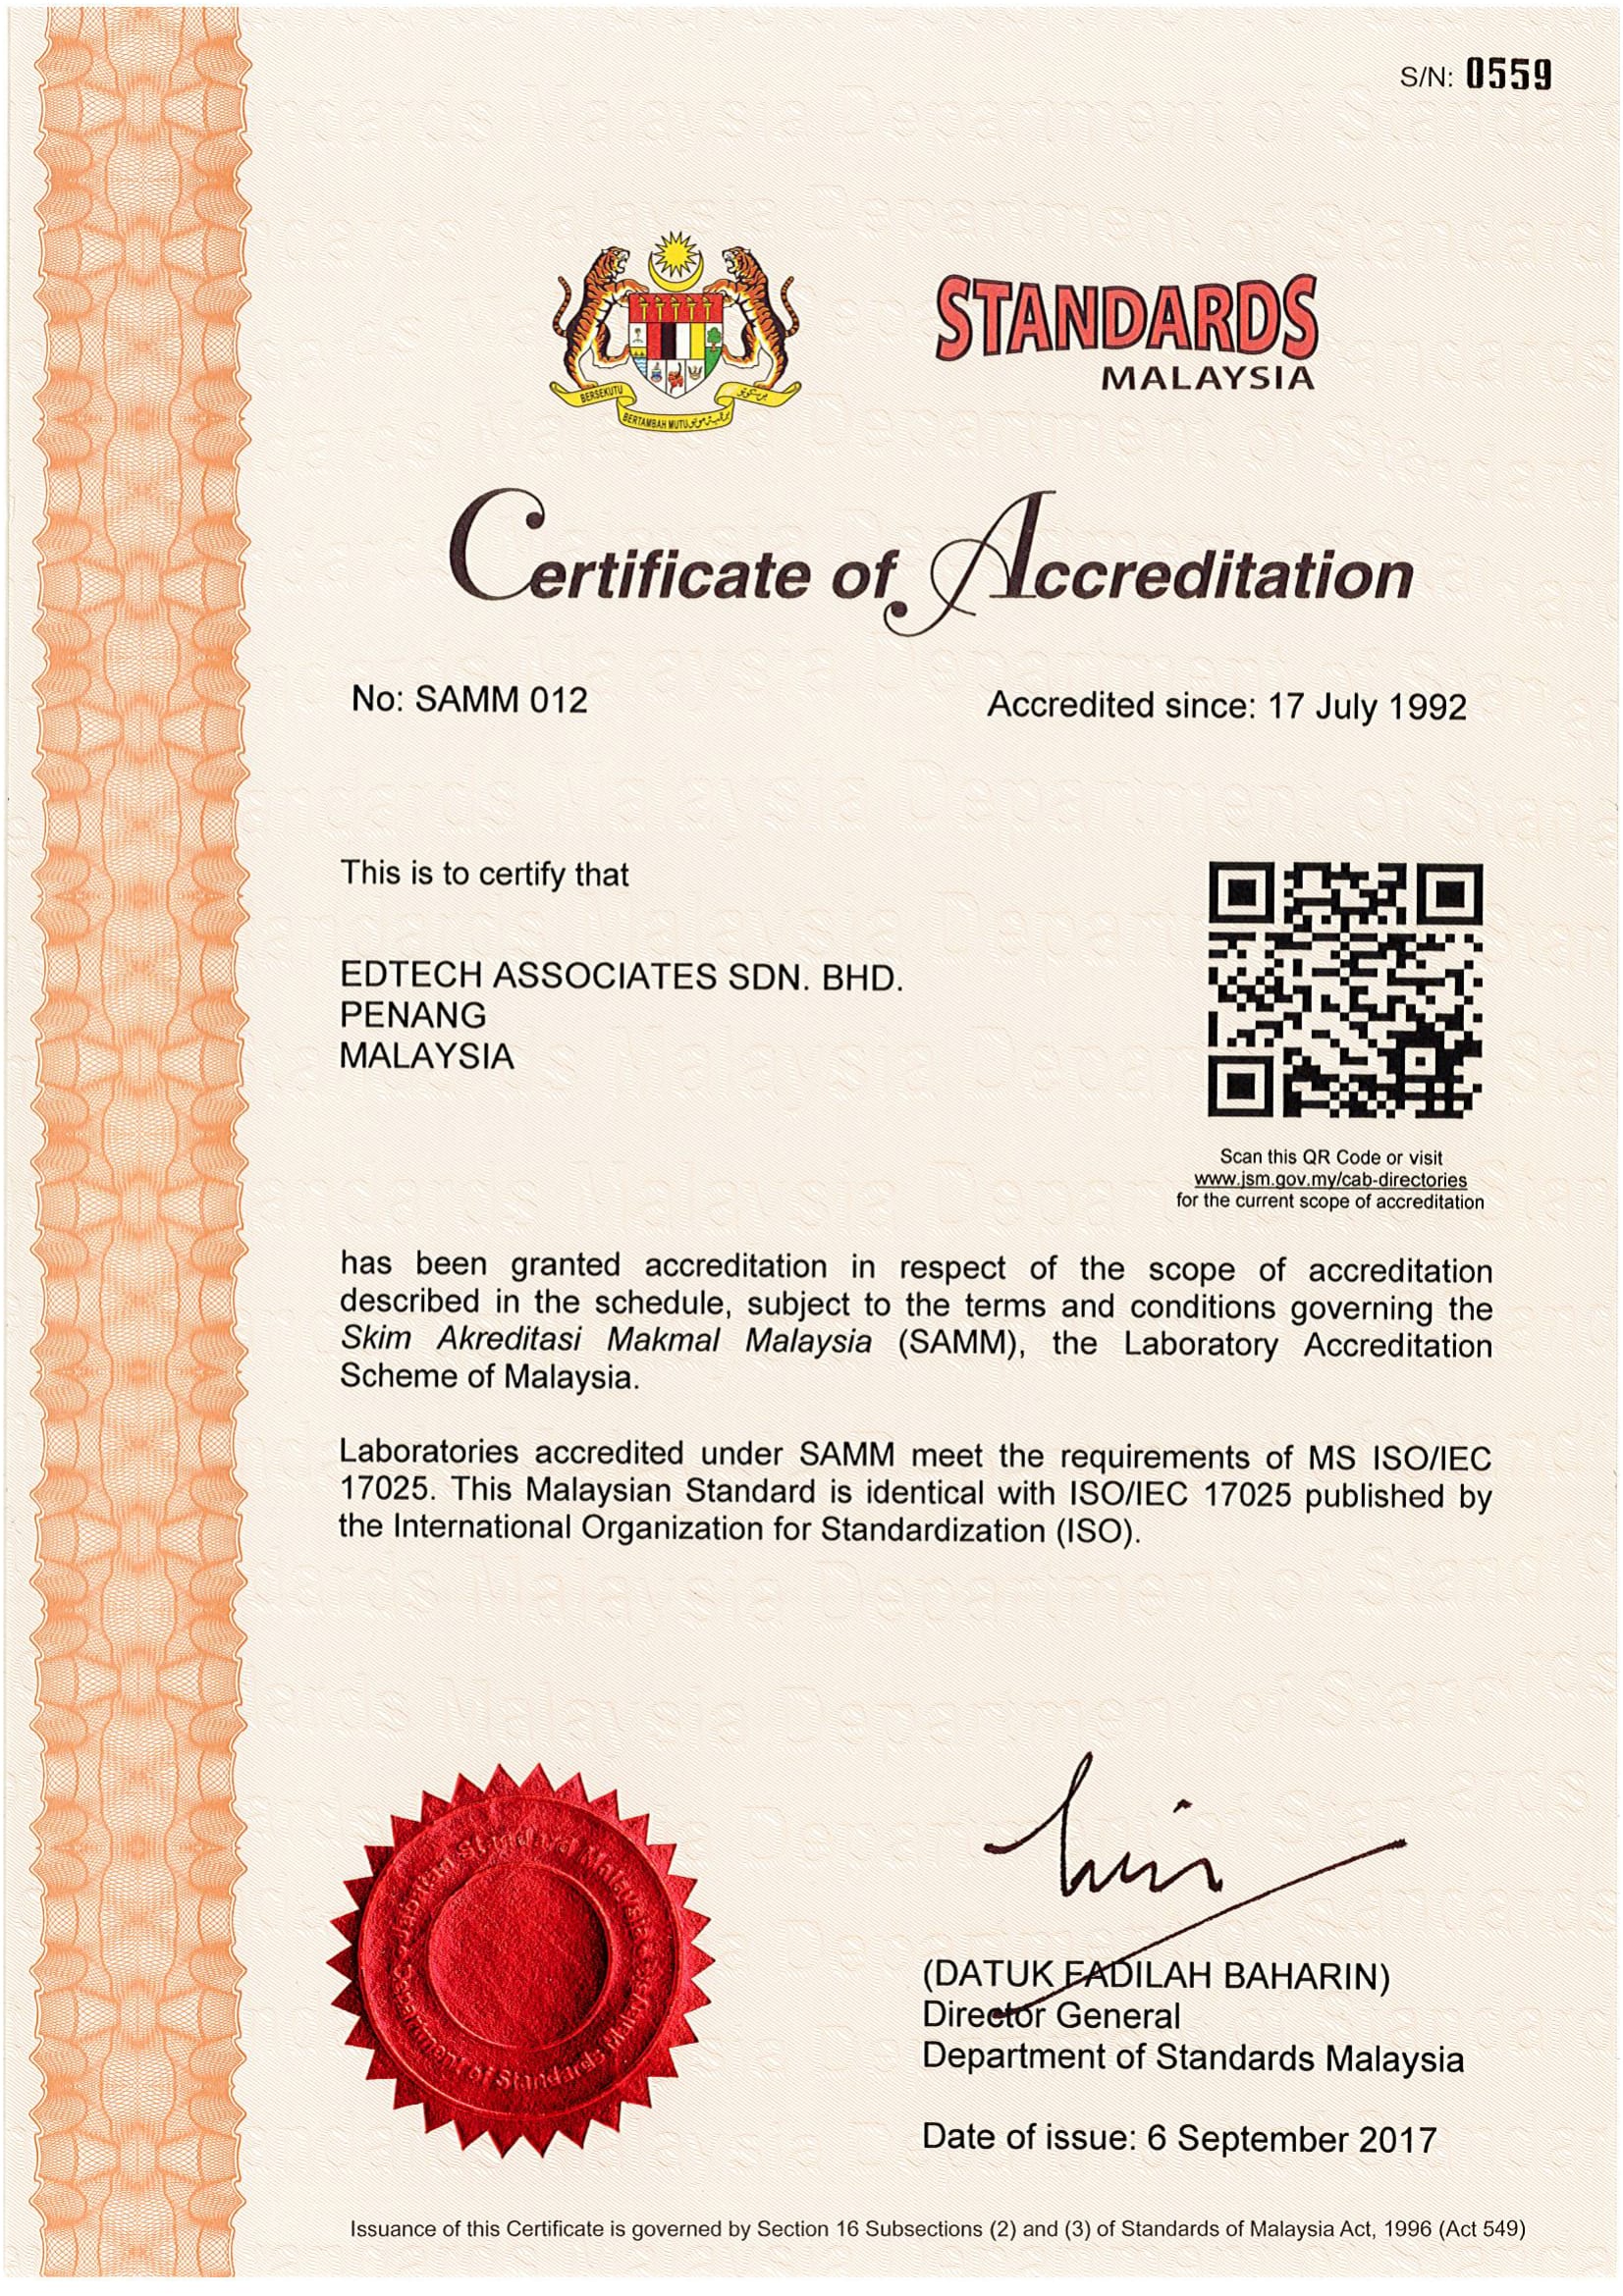 Certificate of Accreditation from 